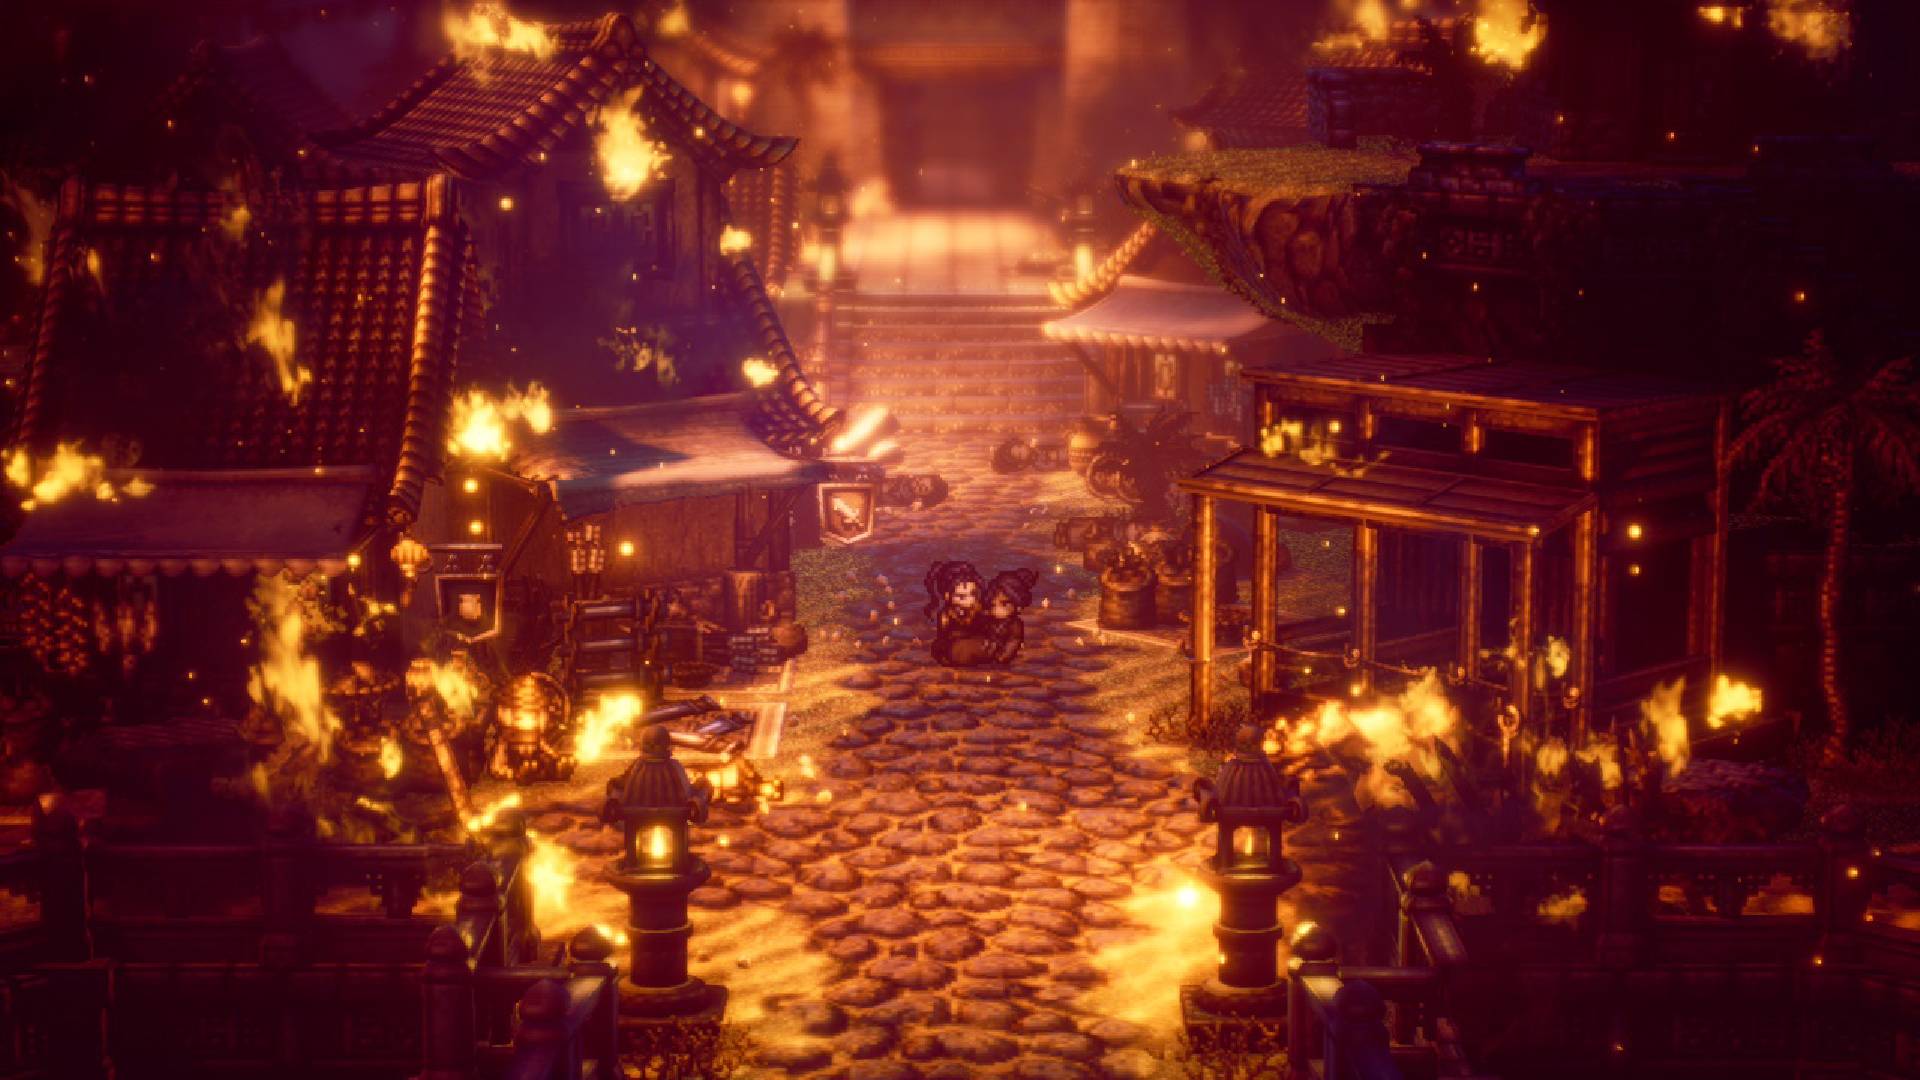 Octopath Traveller II Review - A Modern Classic - Explosion Network